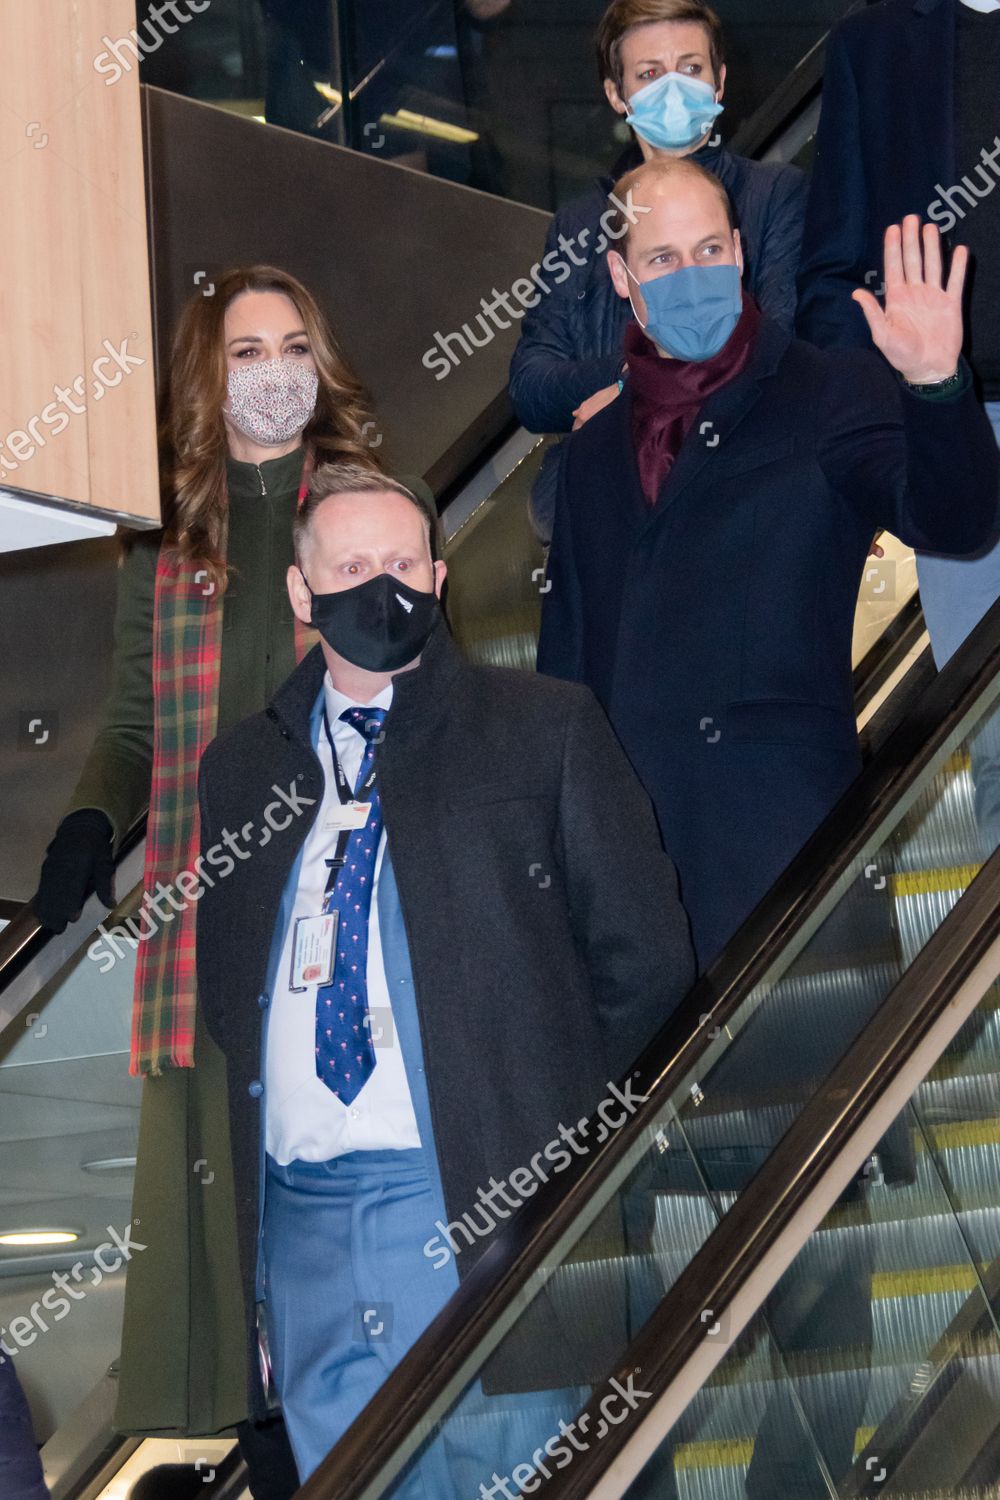 prince-william-and-catherine-duchess-of-cambridge-at-euston-station-london-uk-shutterstock-editorial-11244089ad.jpg